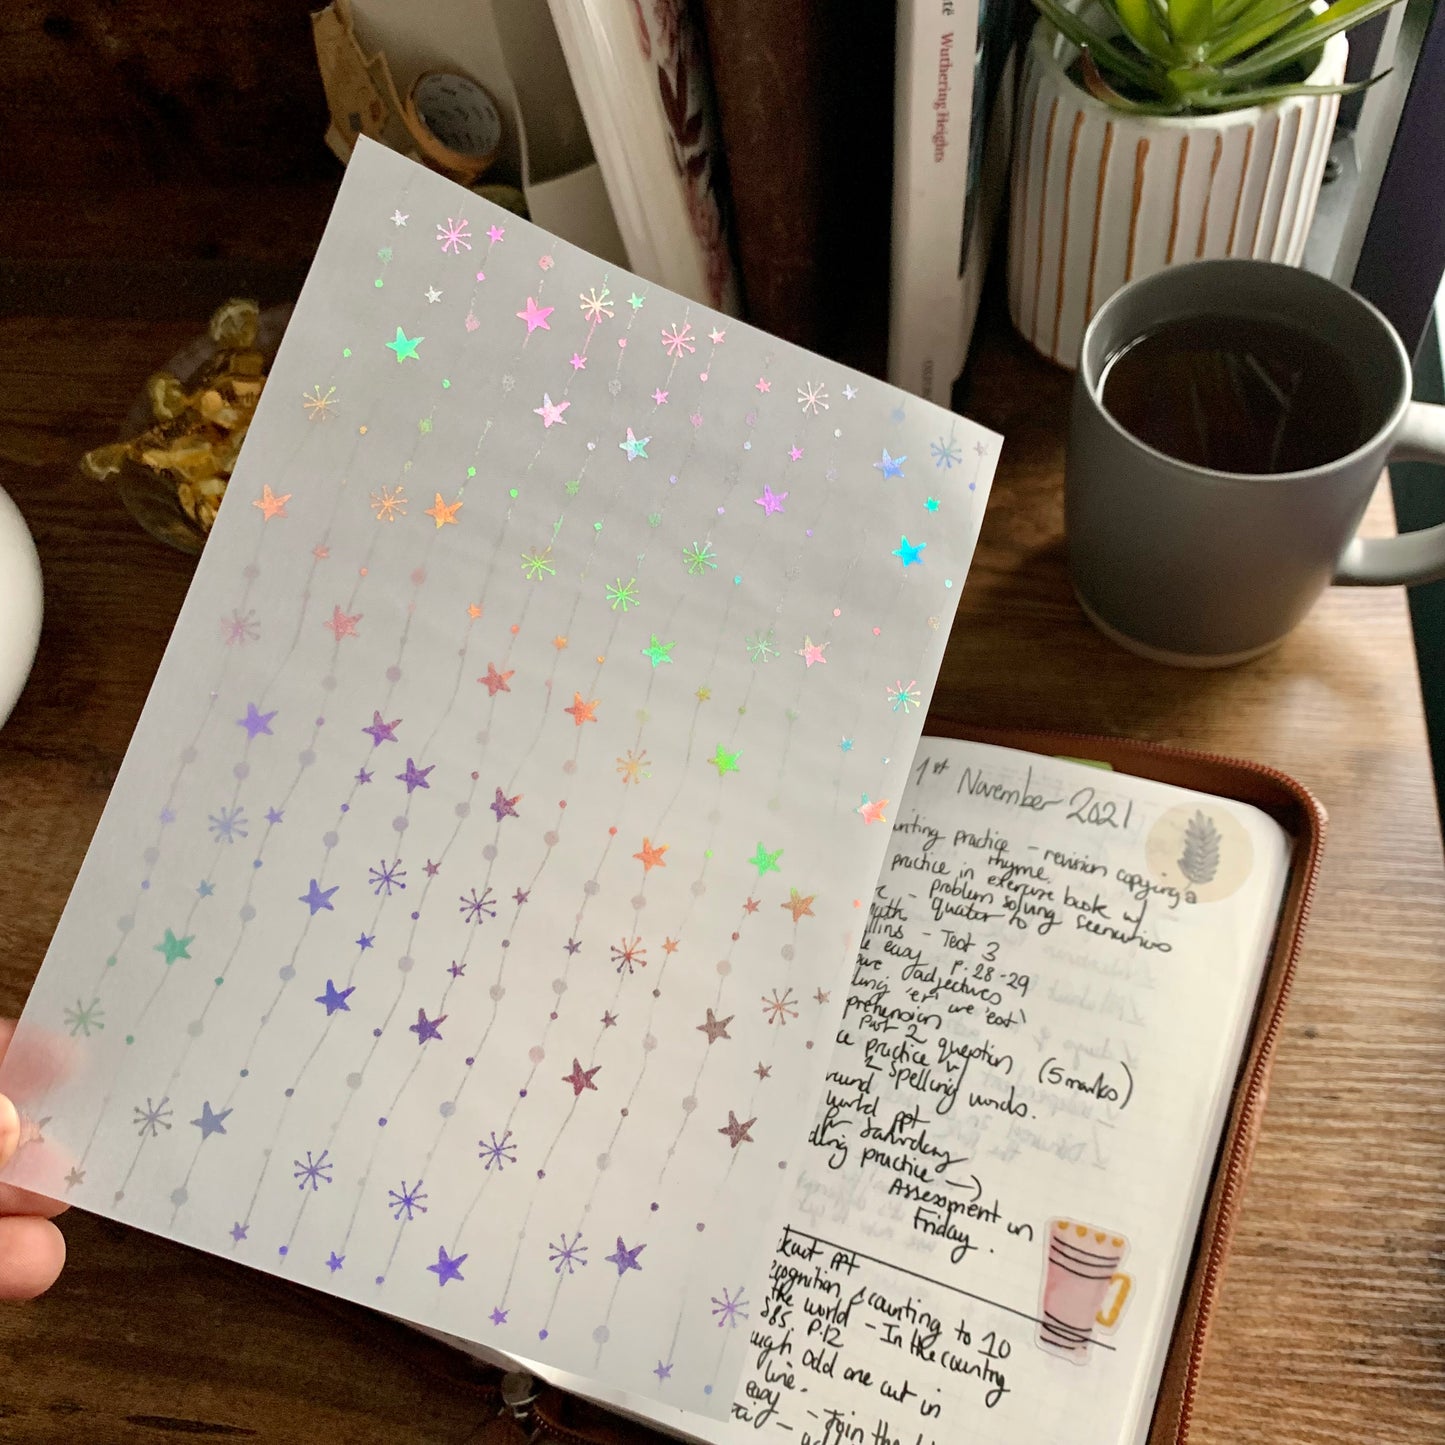 Holographic Foiled Snowflakes - Vellum X Acetate Planner Dashboard - Snowflake Sparkle ✨